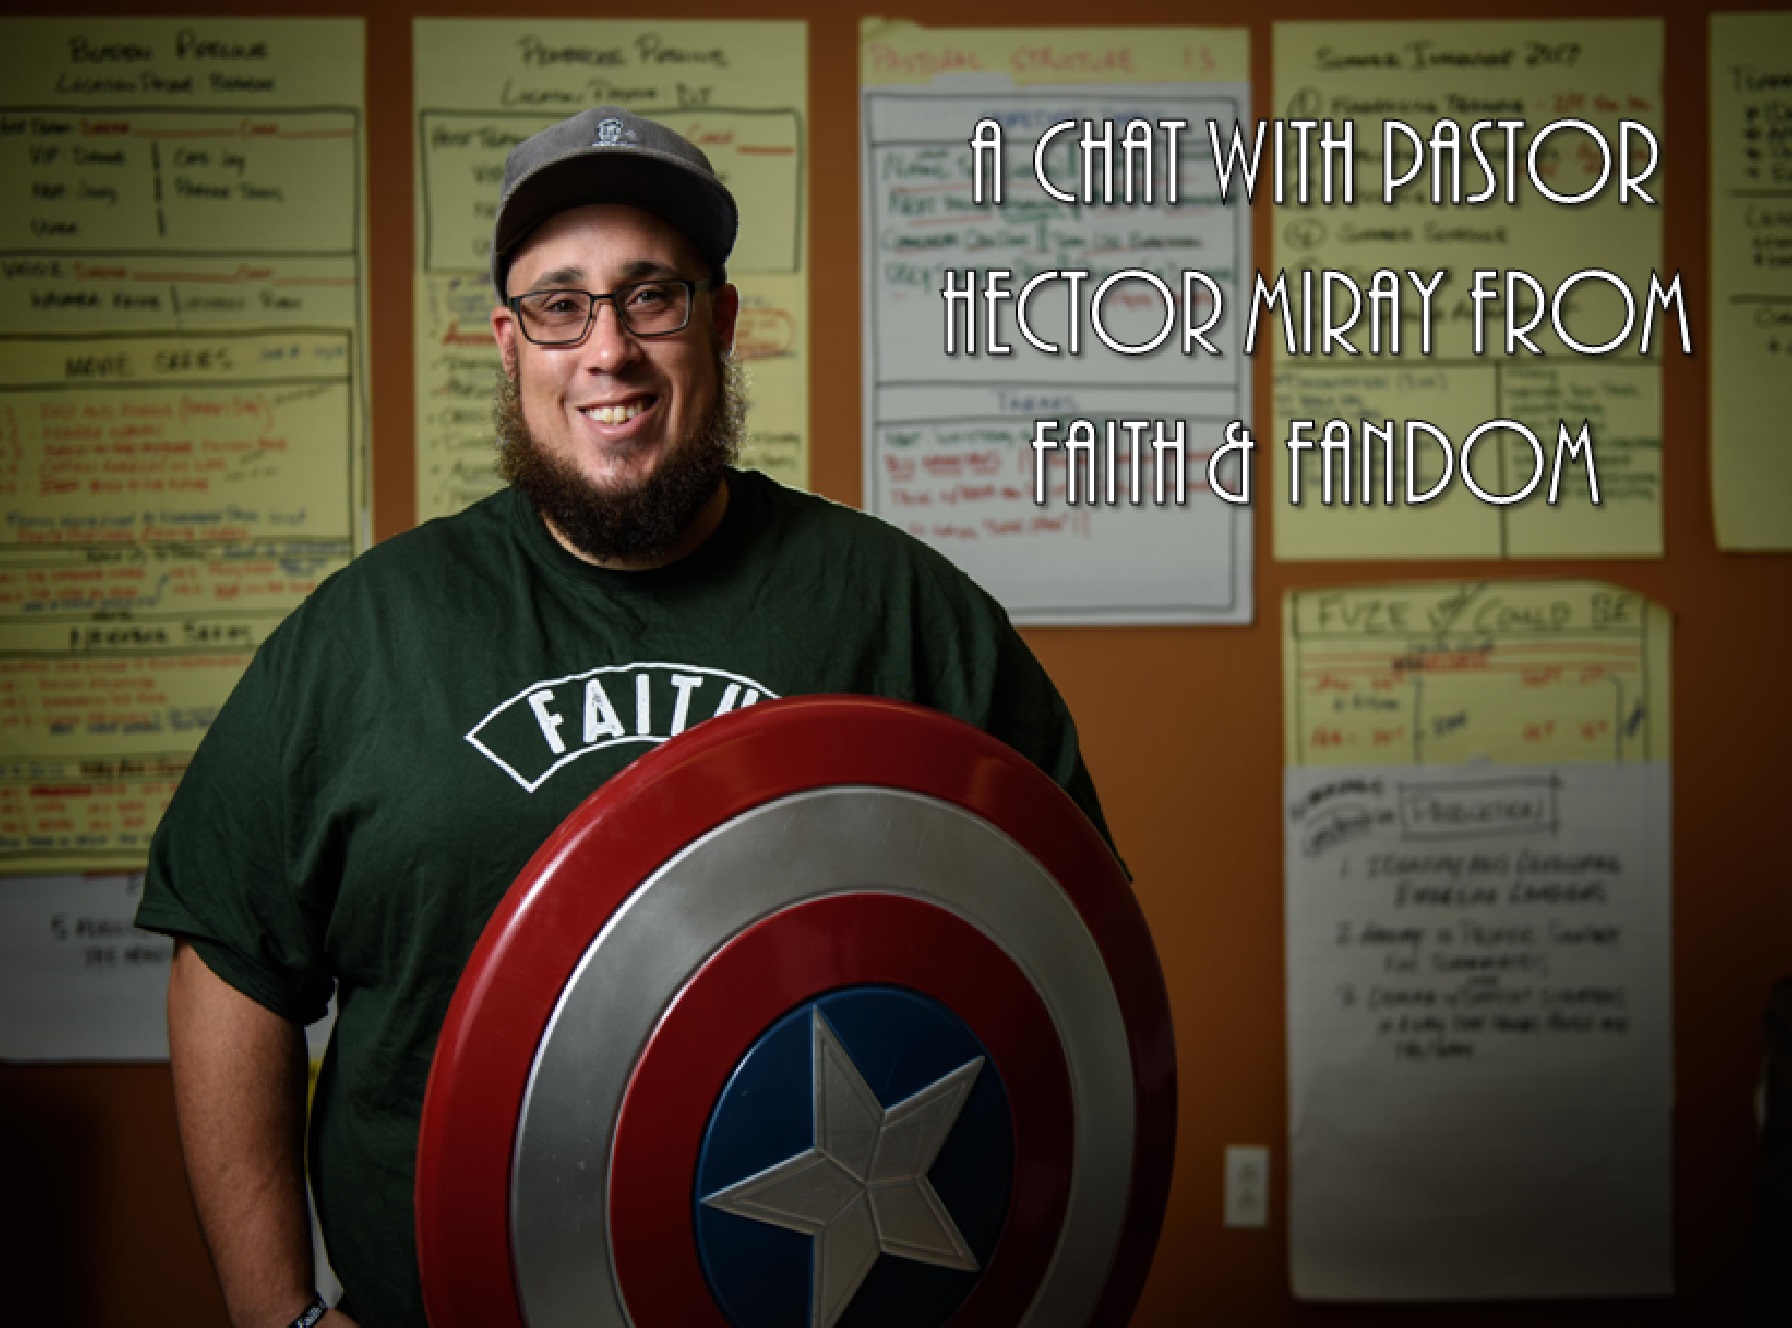 A Chat With Pastor Hector Miray from Faith & Fandom